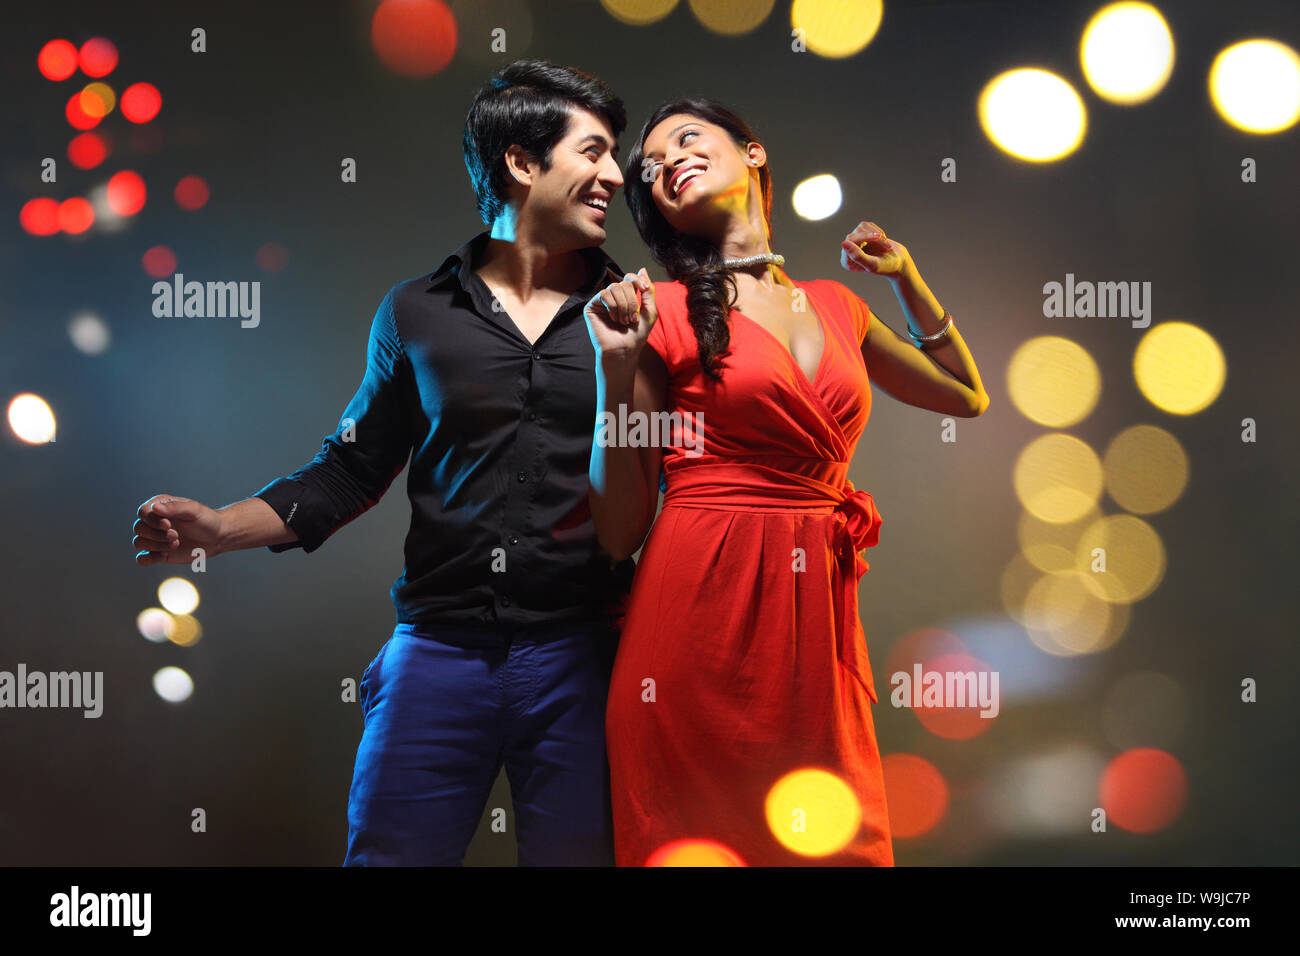 Young couple dancing at a nightclub Stock Photo